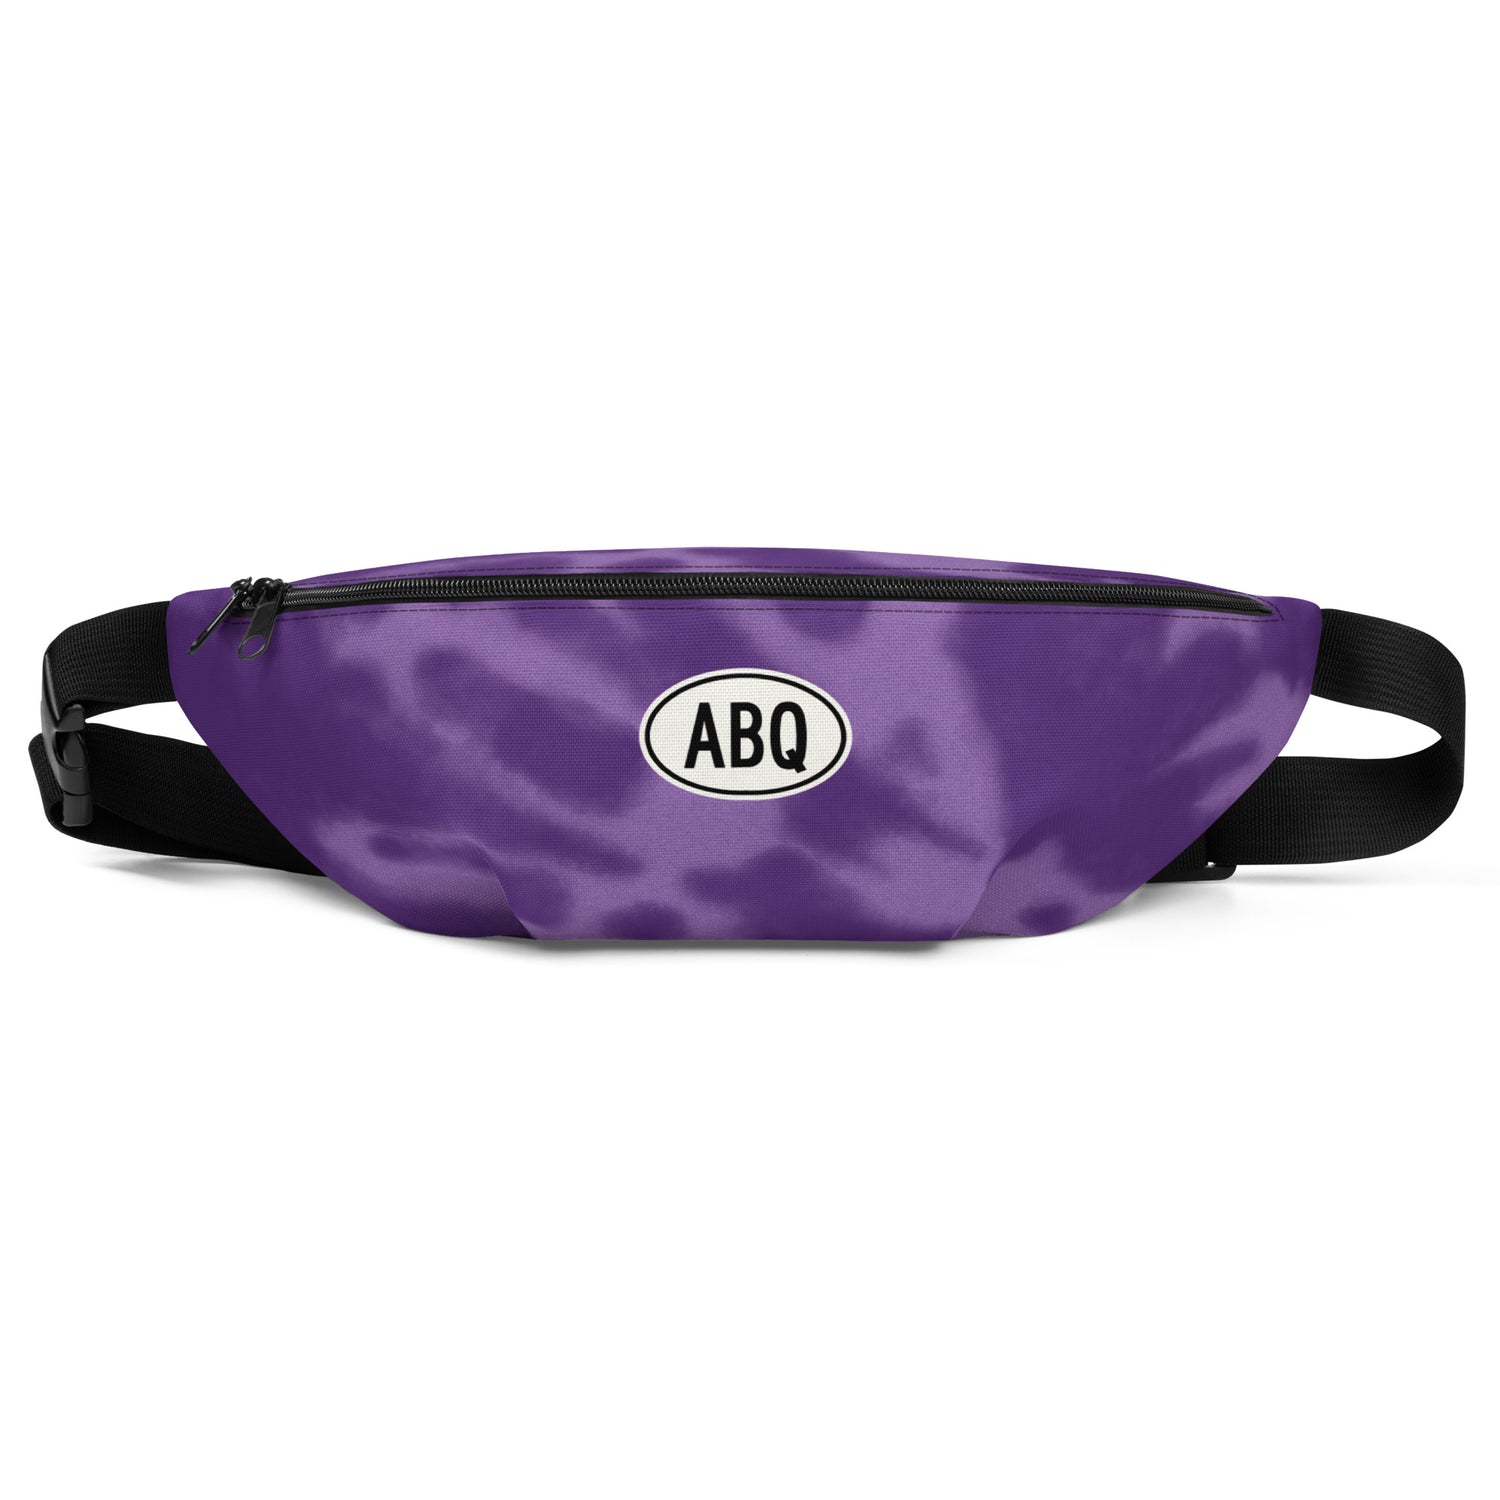 Albuquerque New Mexico Backpacks, Fanny Packs and Tote Bags • ABQ Airport Code